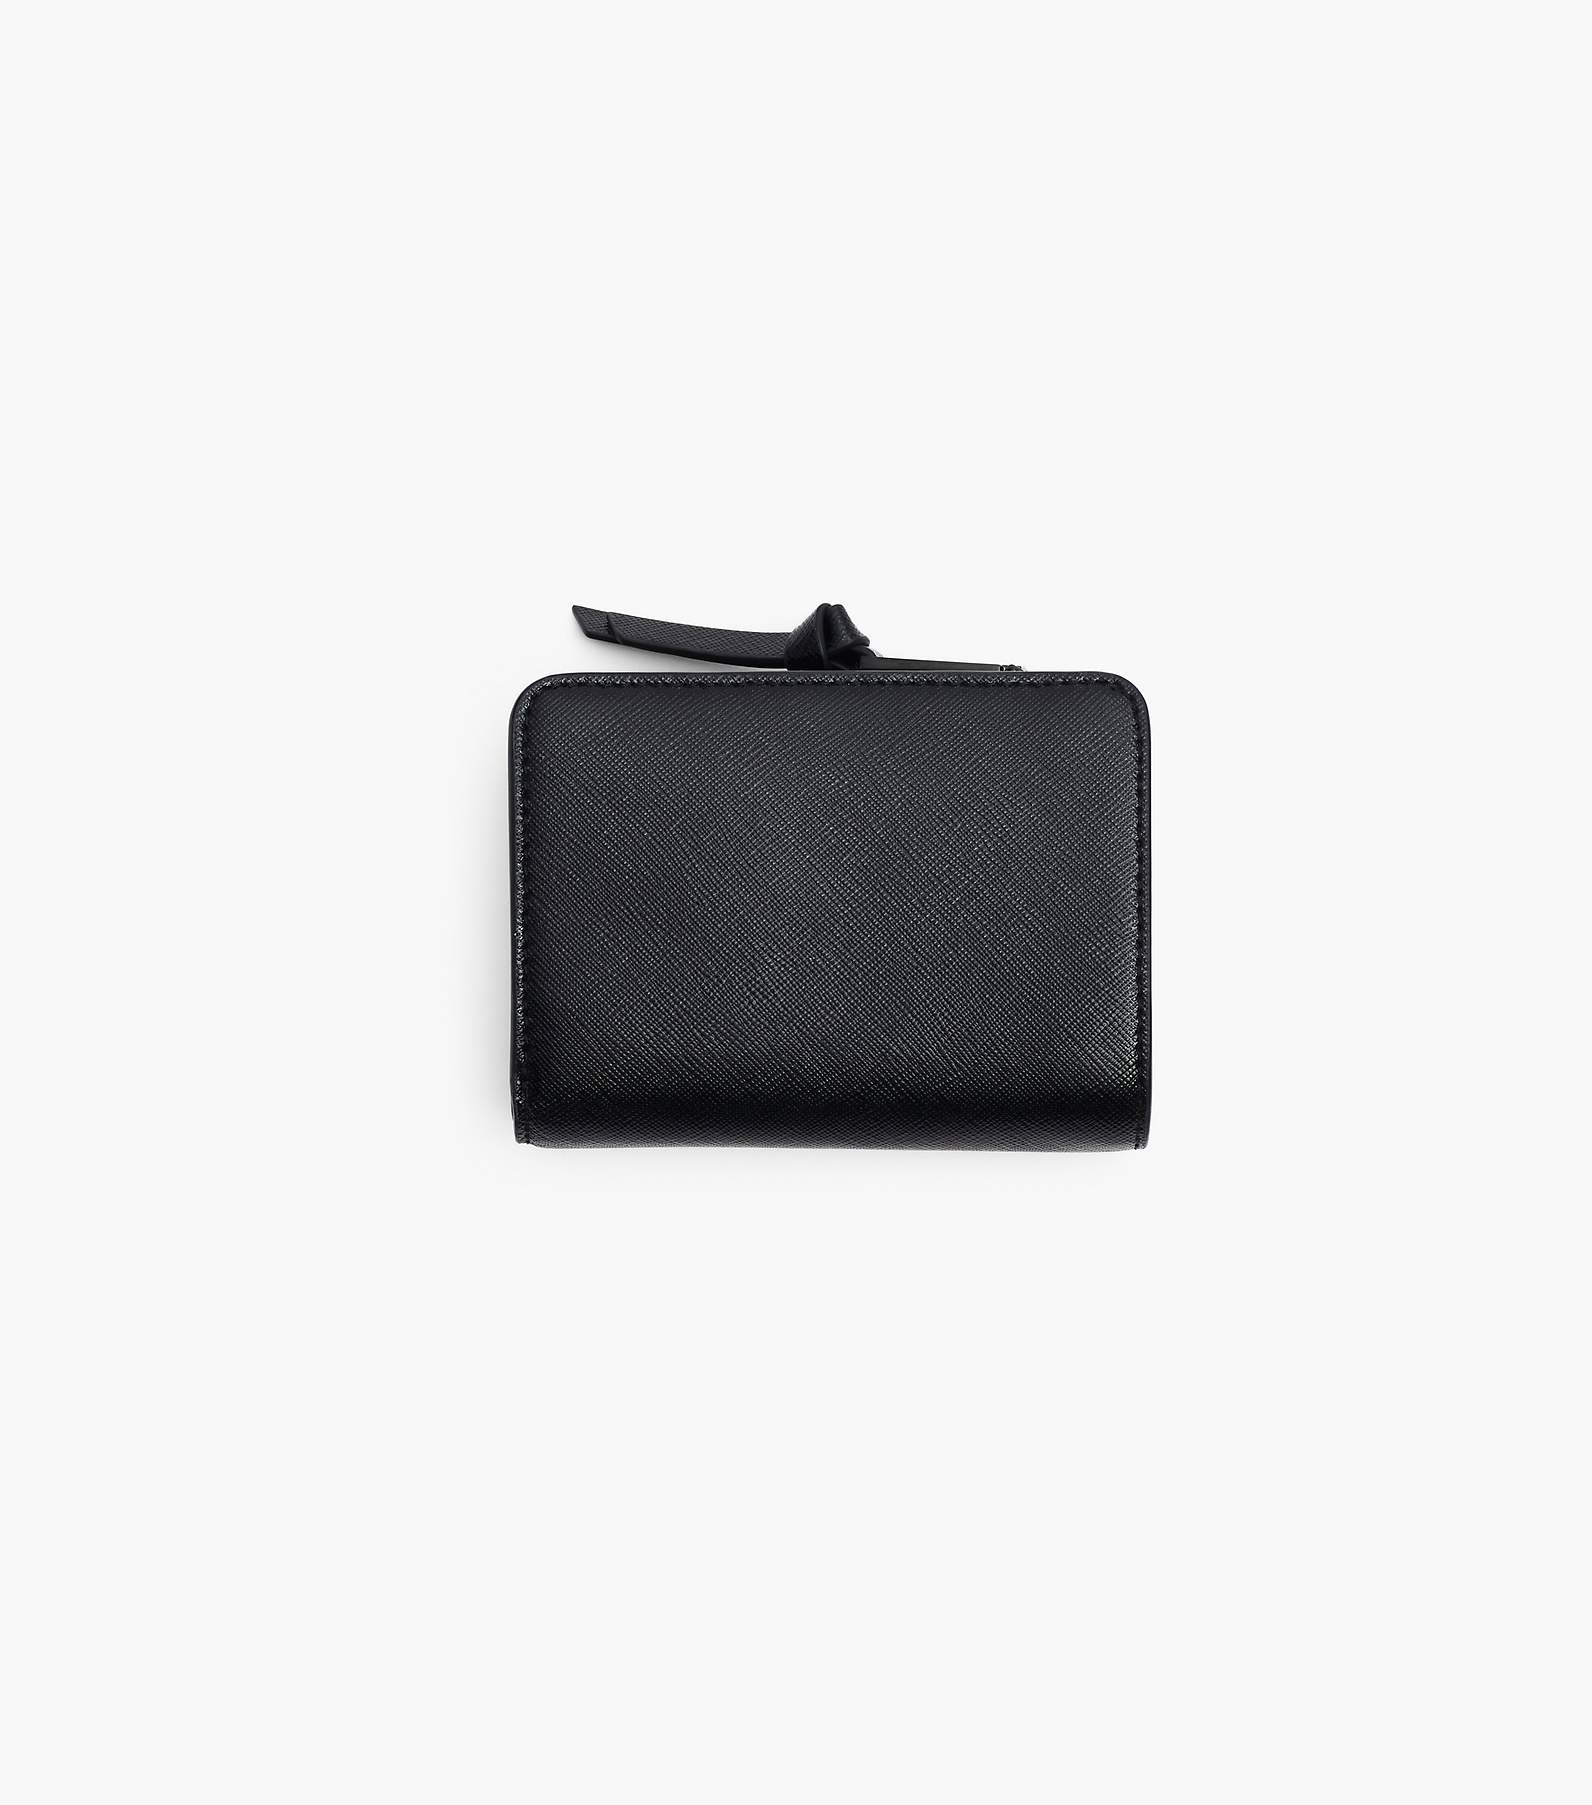 Marc Jacobs The Snapshot Dtm Mini Compact Wallet in Black